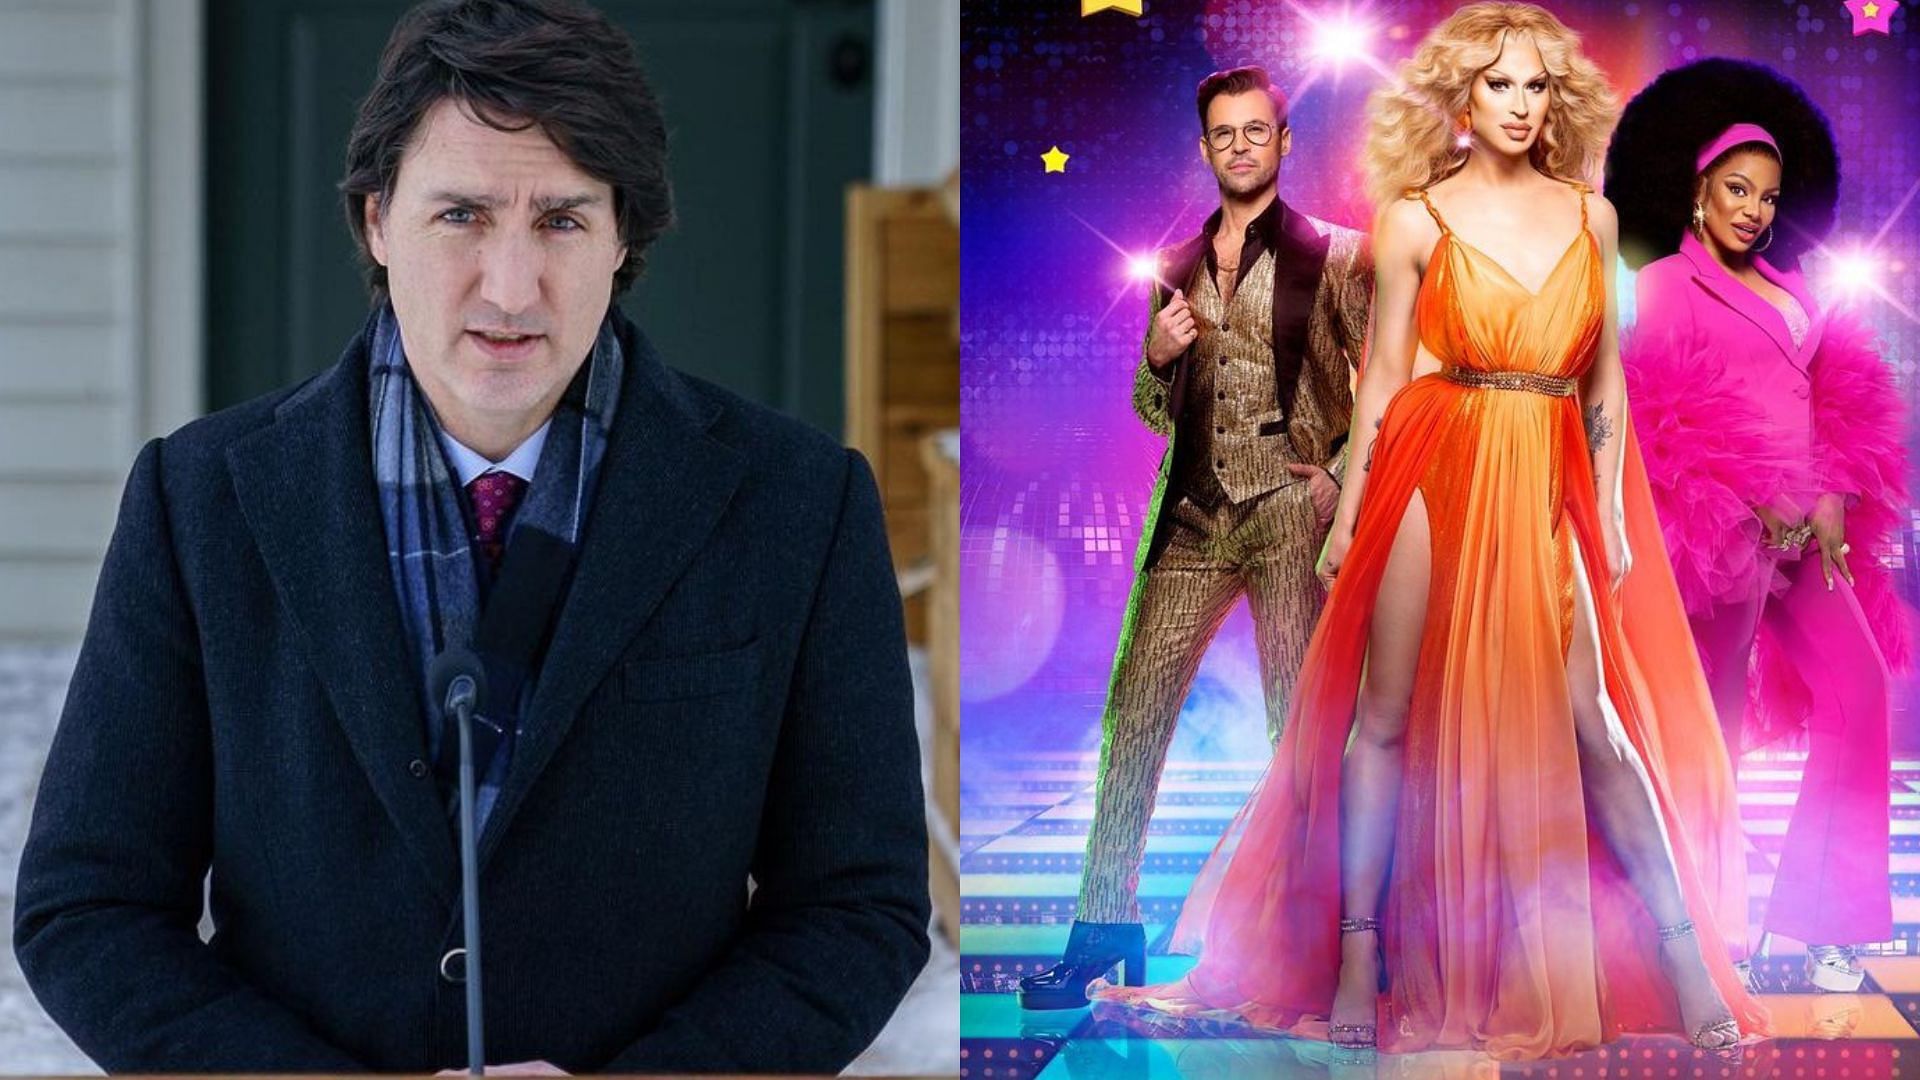 PM Justin Trudeau to appear on Canada&rsquo;s Drag Race: Canada Vs. the World 2022 (image via @justinpjtrudeau and @canadasdragrace/Instagram)